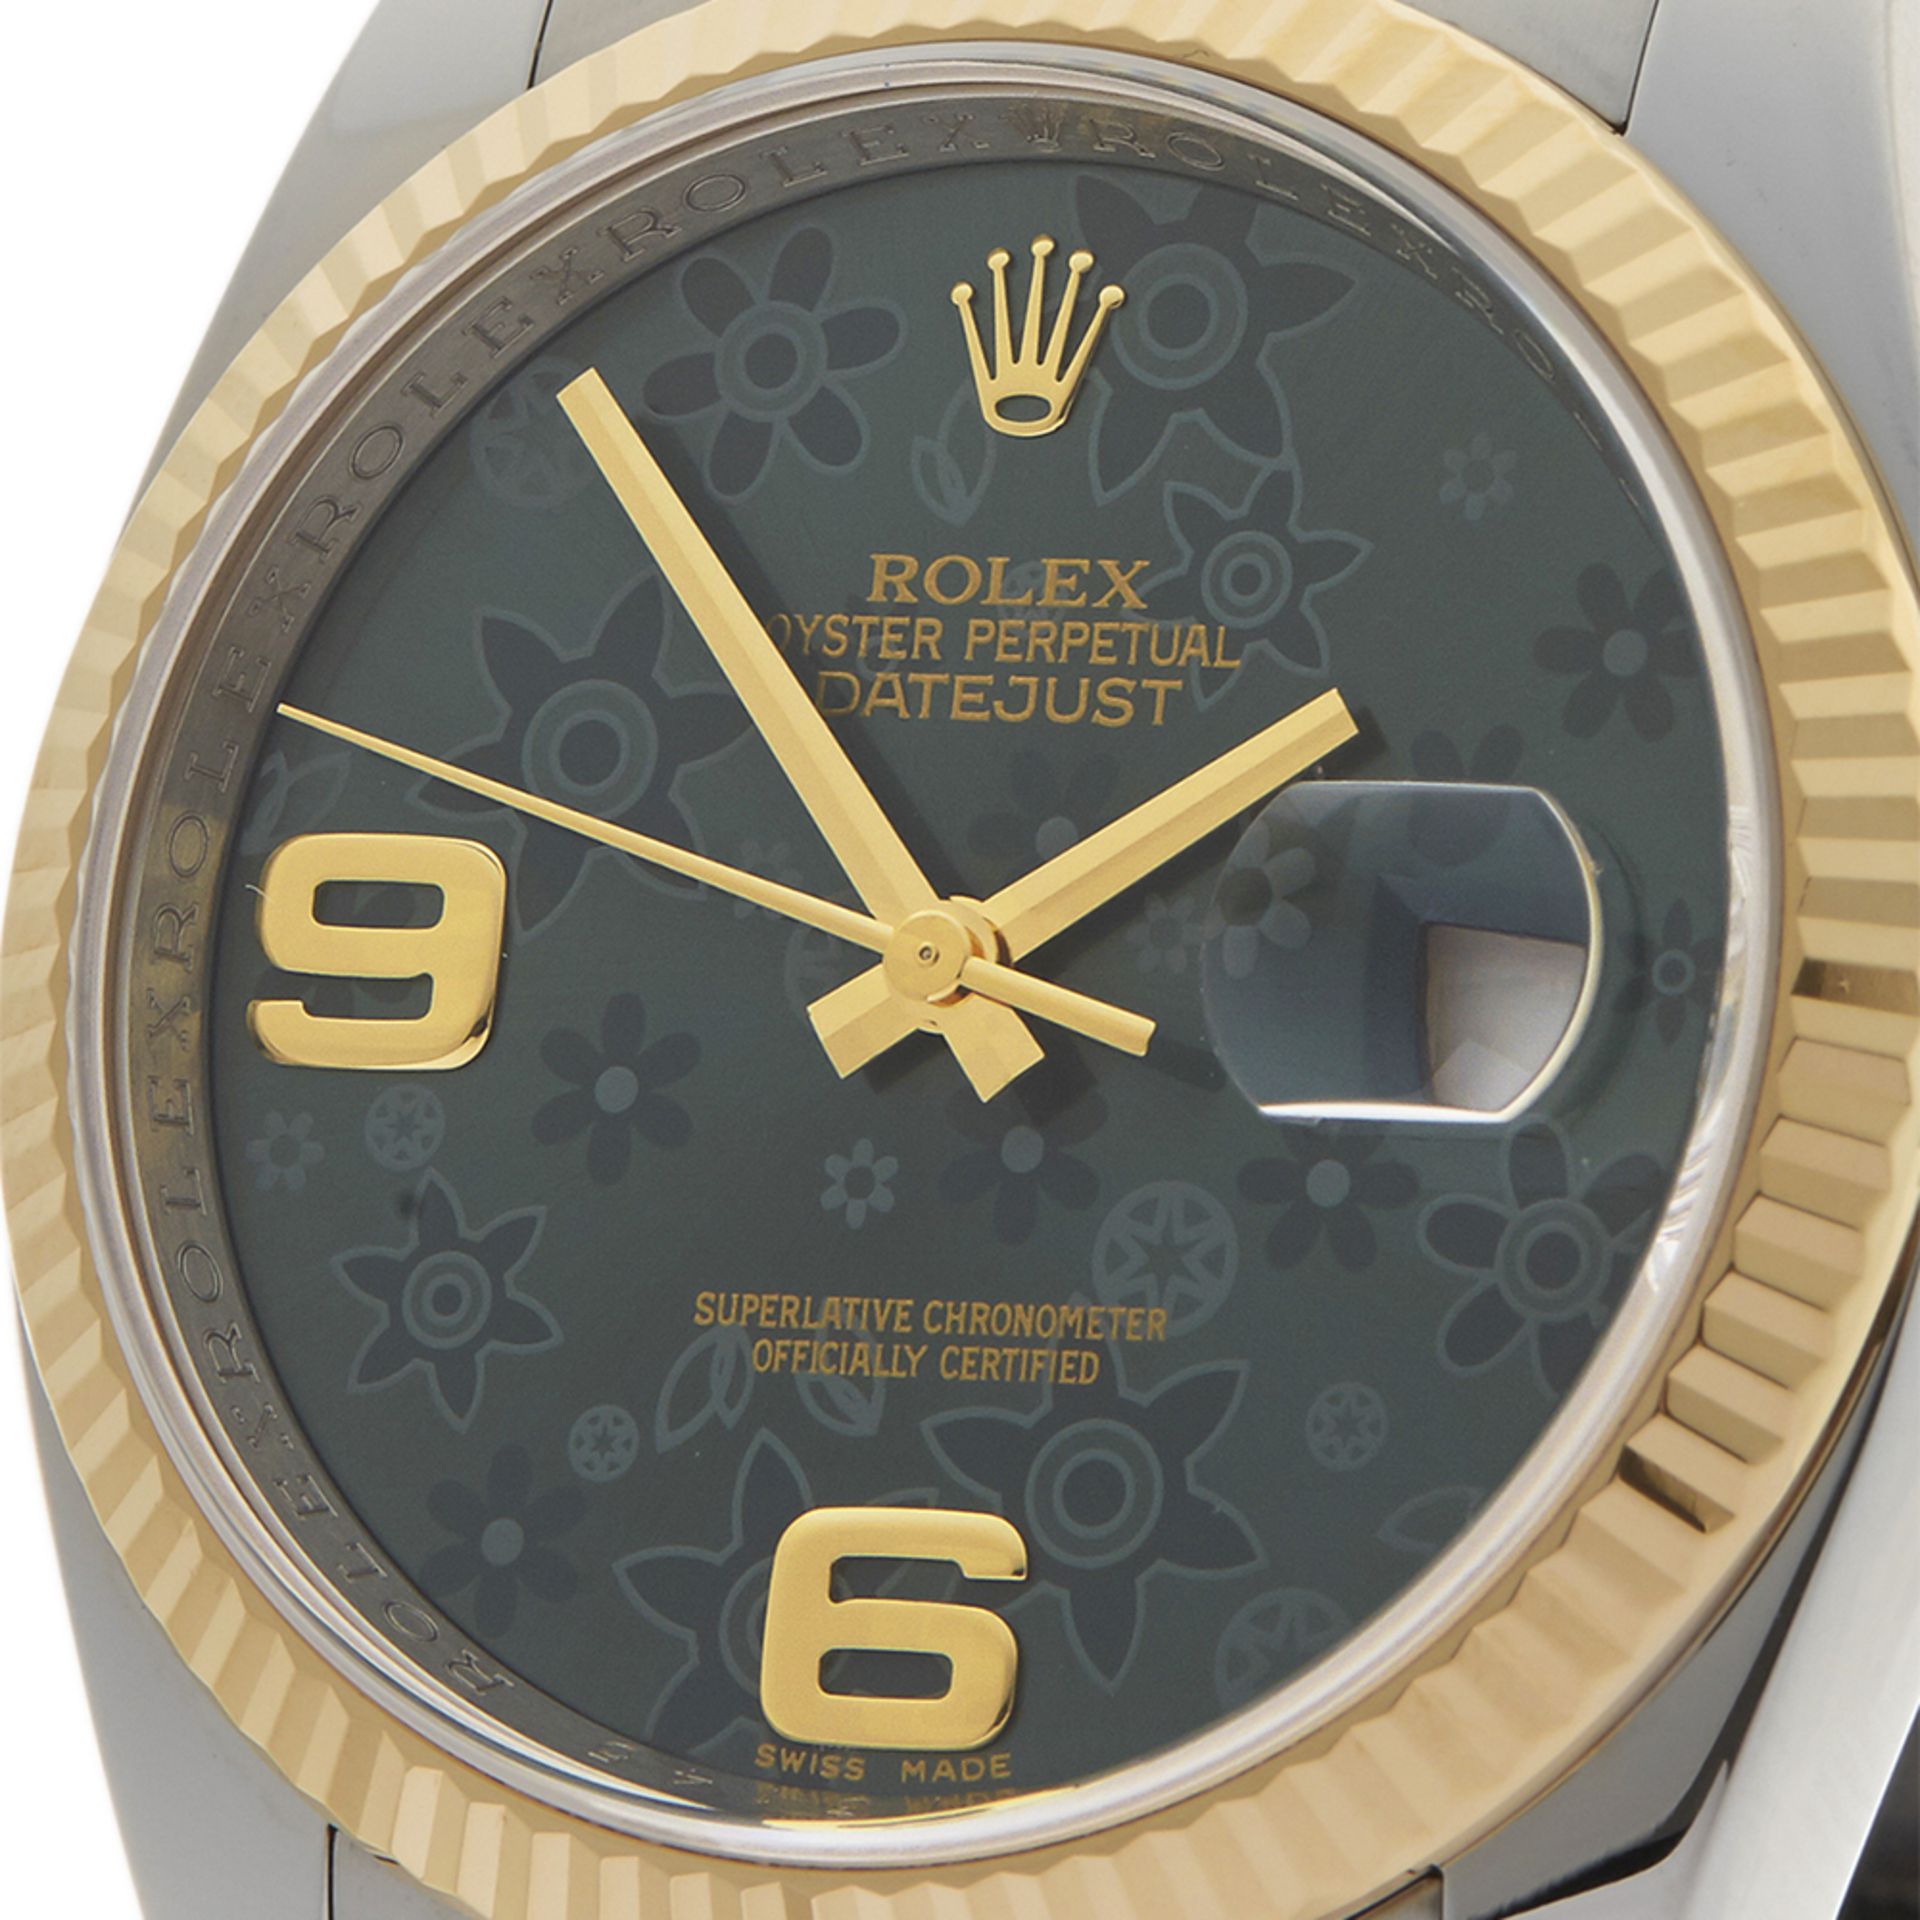 Datejust 36mm Stainless Steel & 18K Yellow Gold - 116233